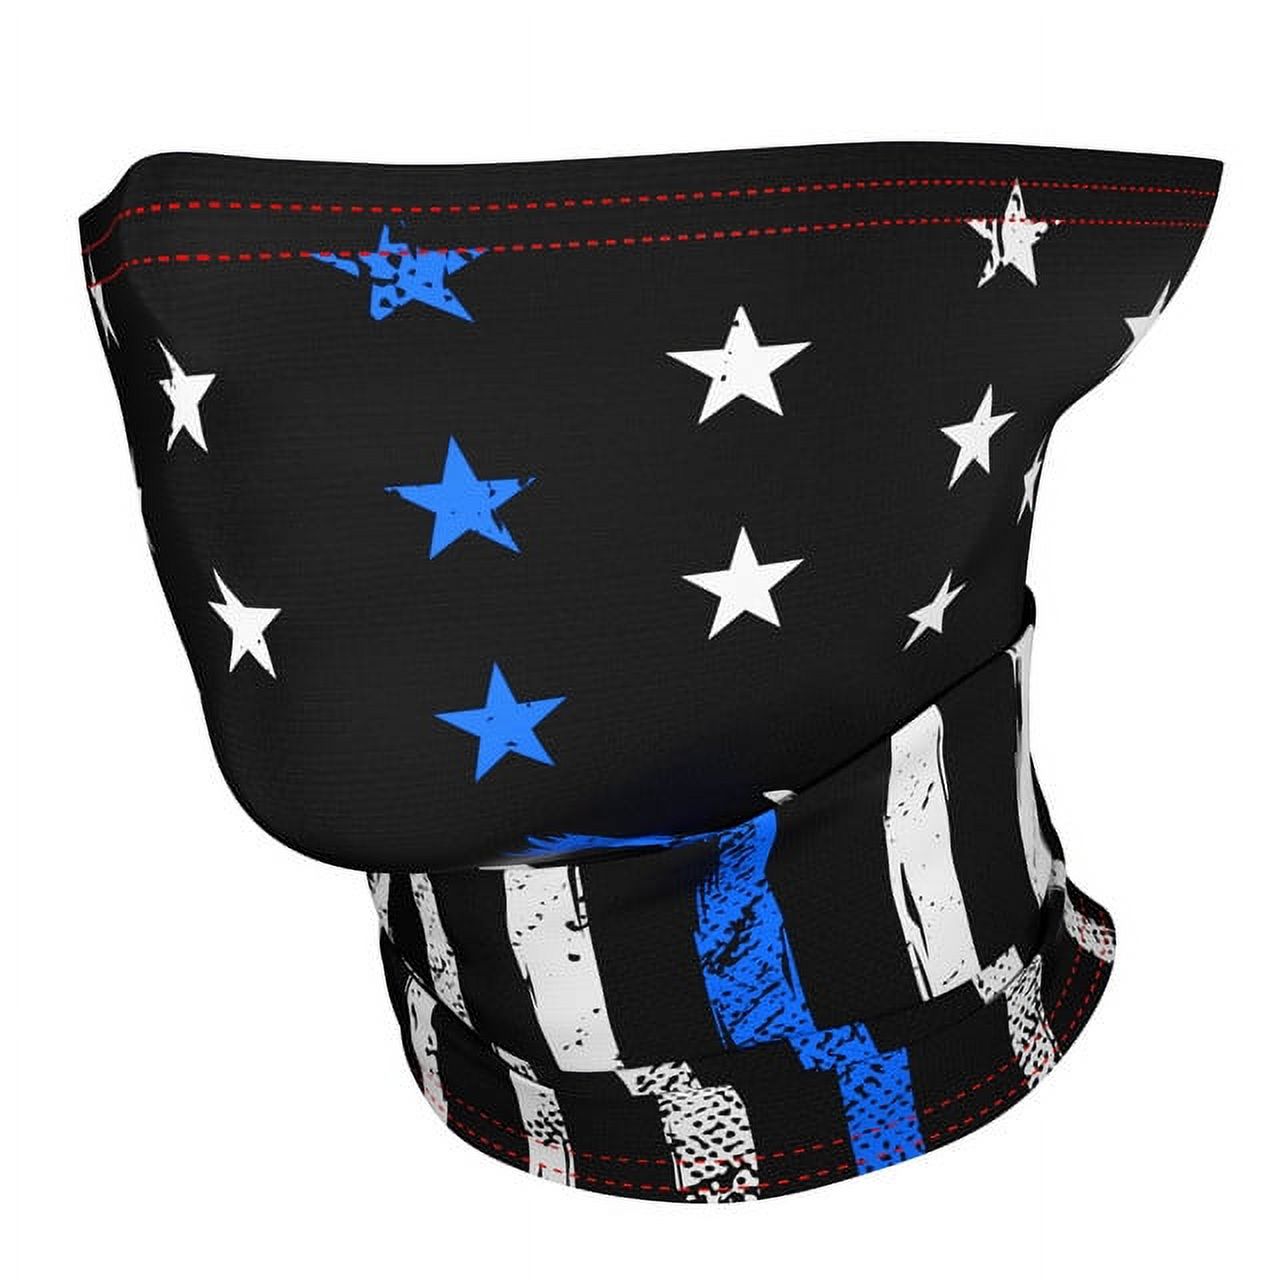 Millenti Neck Gaiter Tactical Breathable for Sun Protection Summer, Snowboard Neck Gaiter (USA Flag) Black-Blue-White, G06UWRBL - image 1 of 5